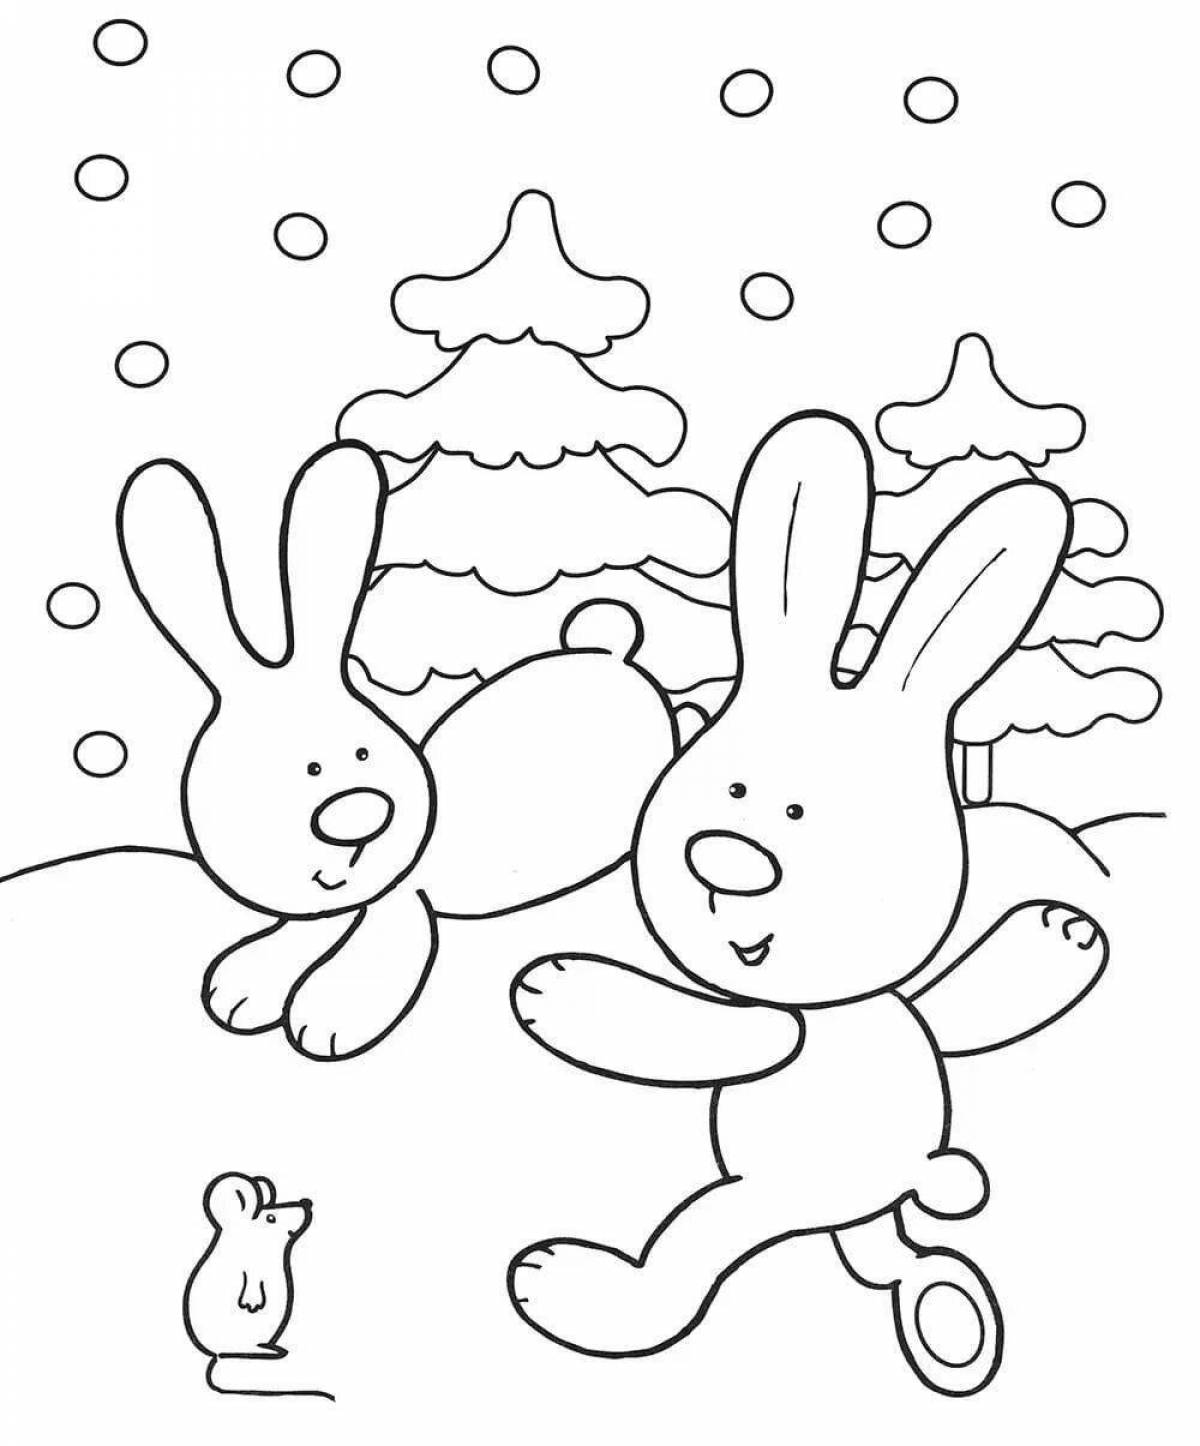 Glowing bunny winter coloring book